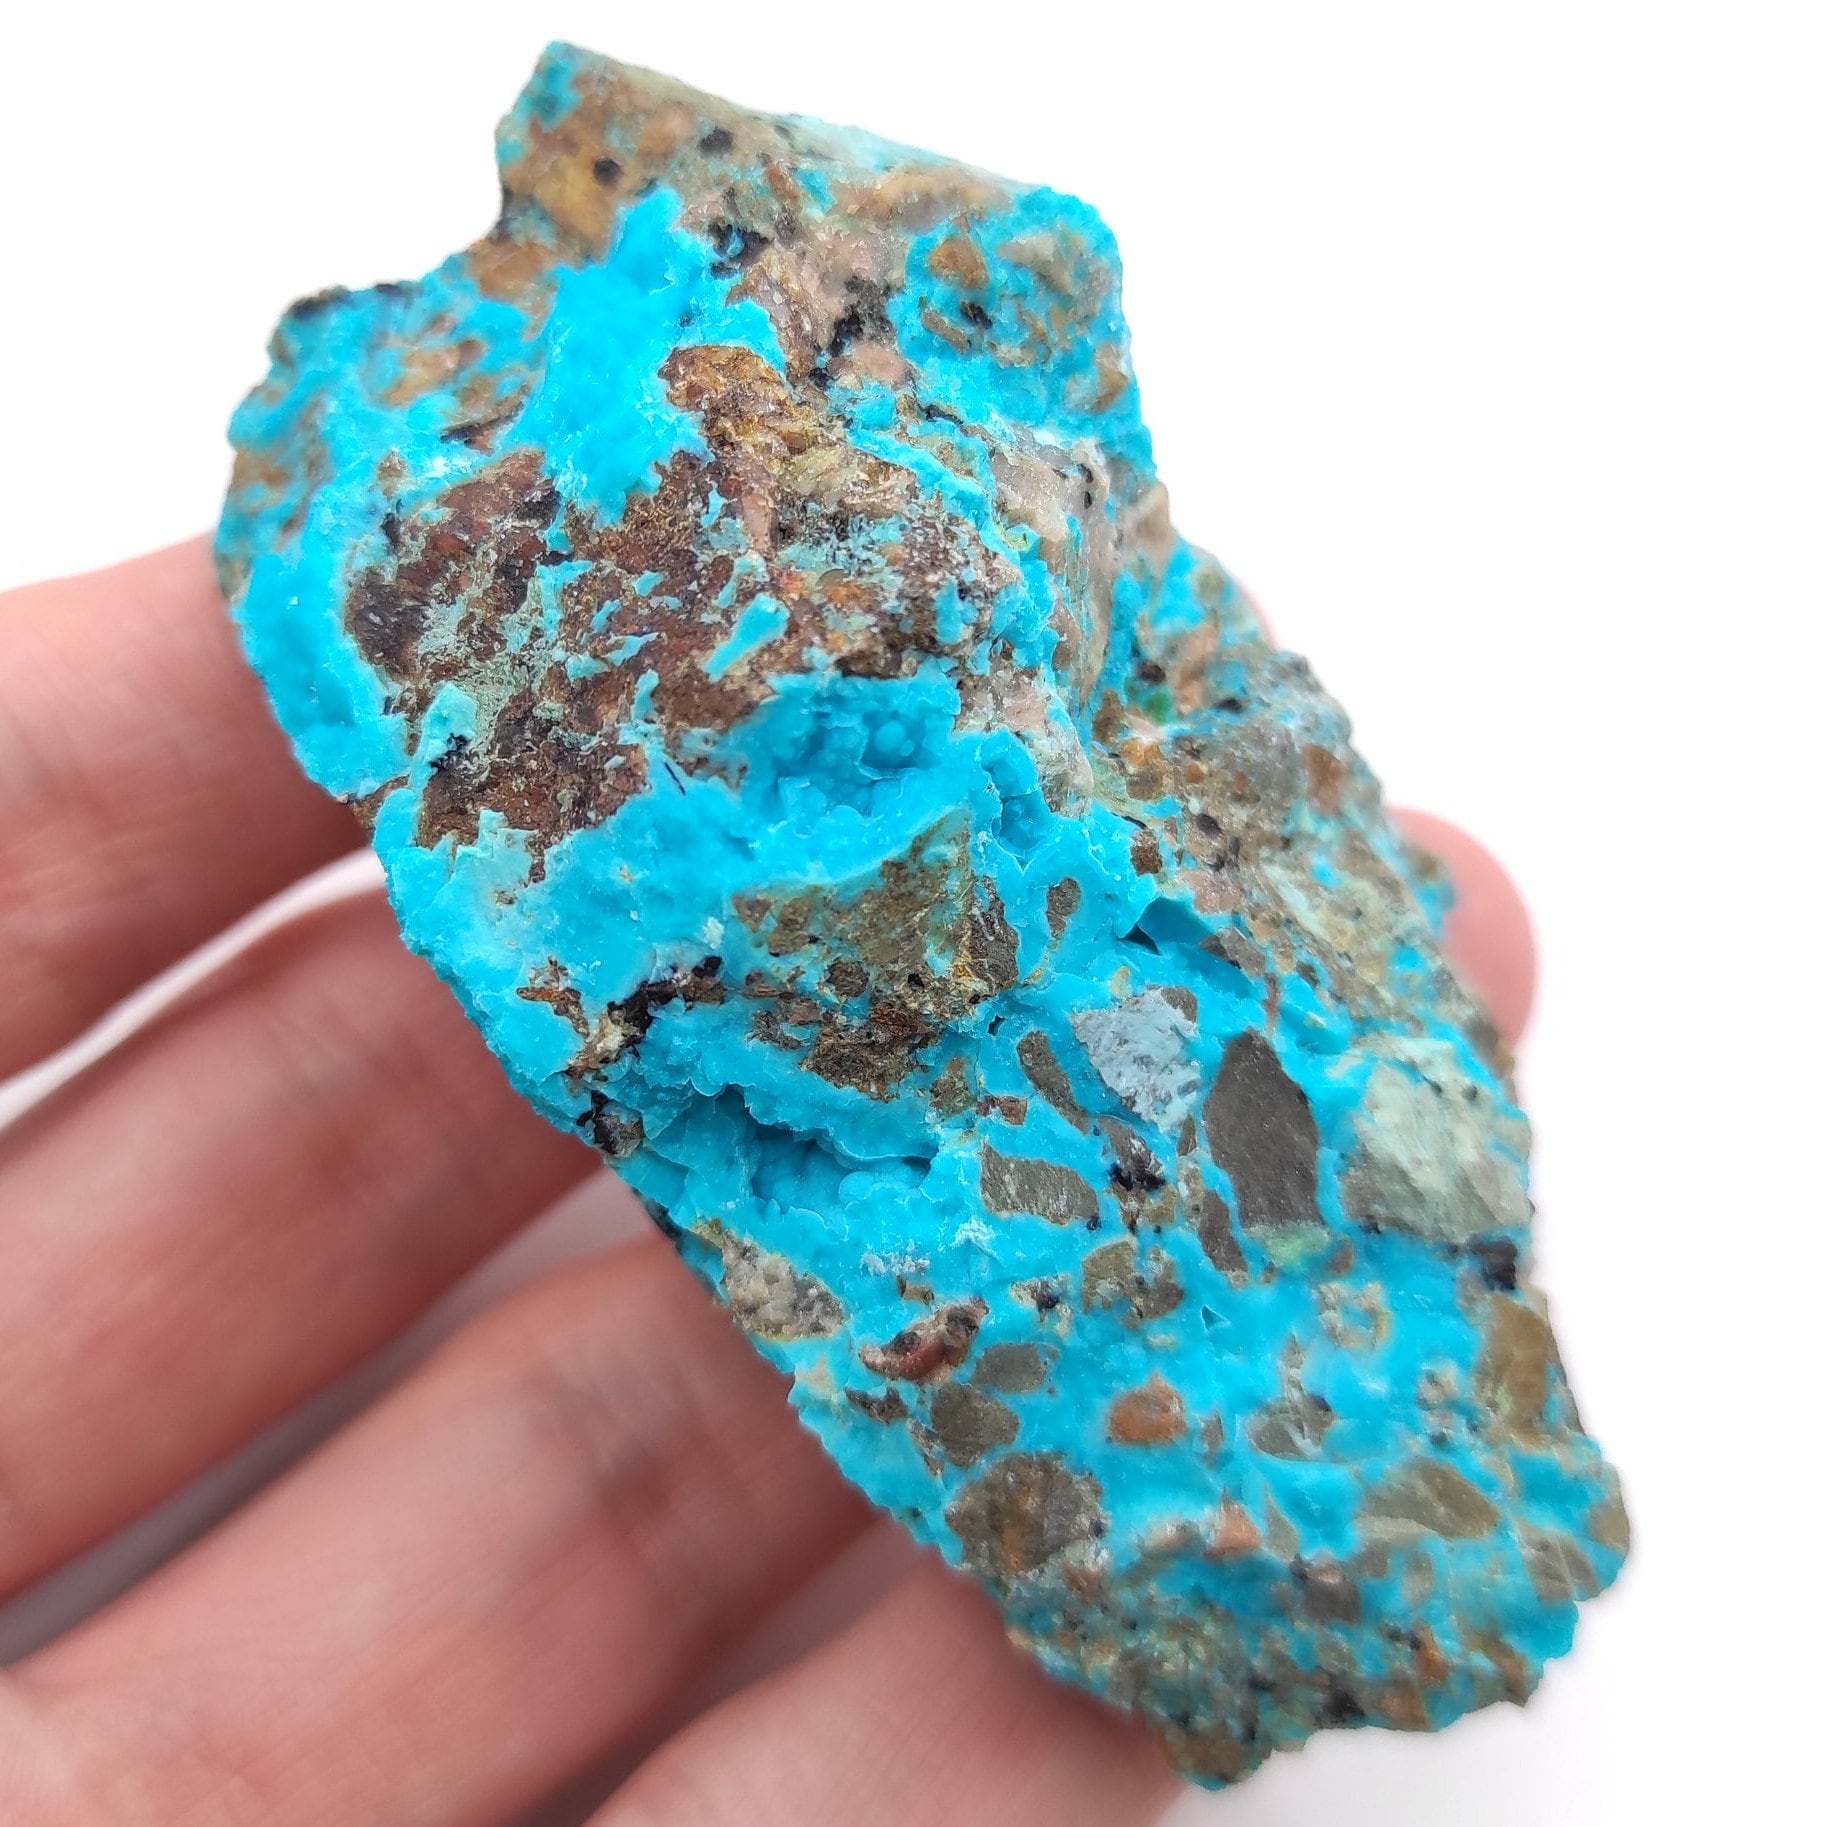 81g Chrysocolla on Matrix - Tyrone, New Mexico - Rough Chrysocolla from United States - Natural Chrysocolla Mineral Specimen - Raw Crystals